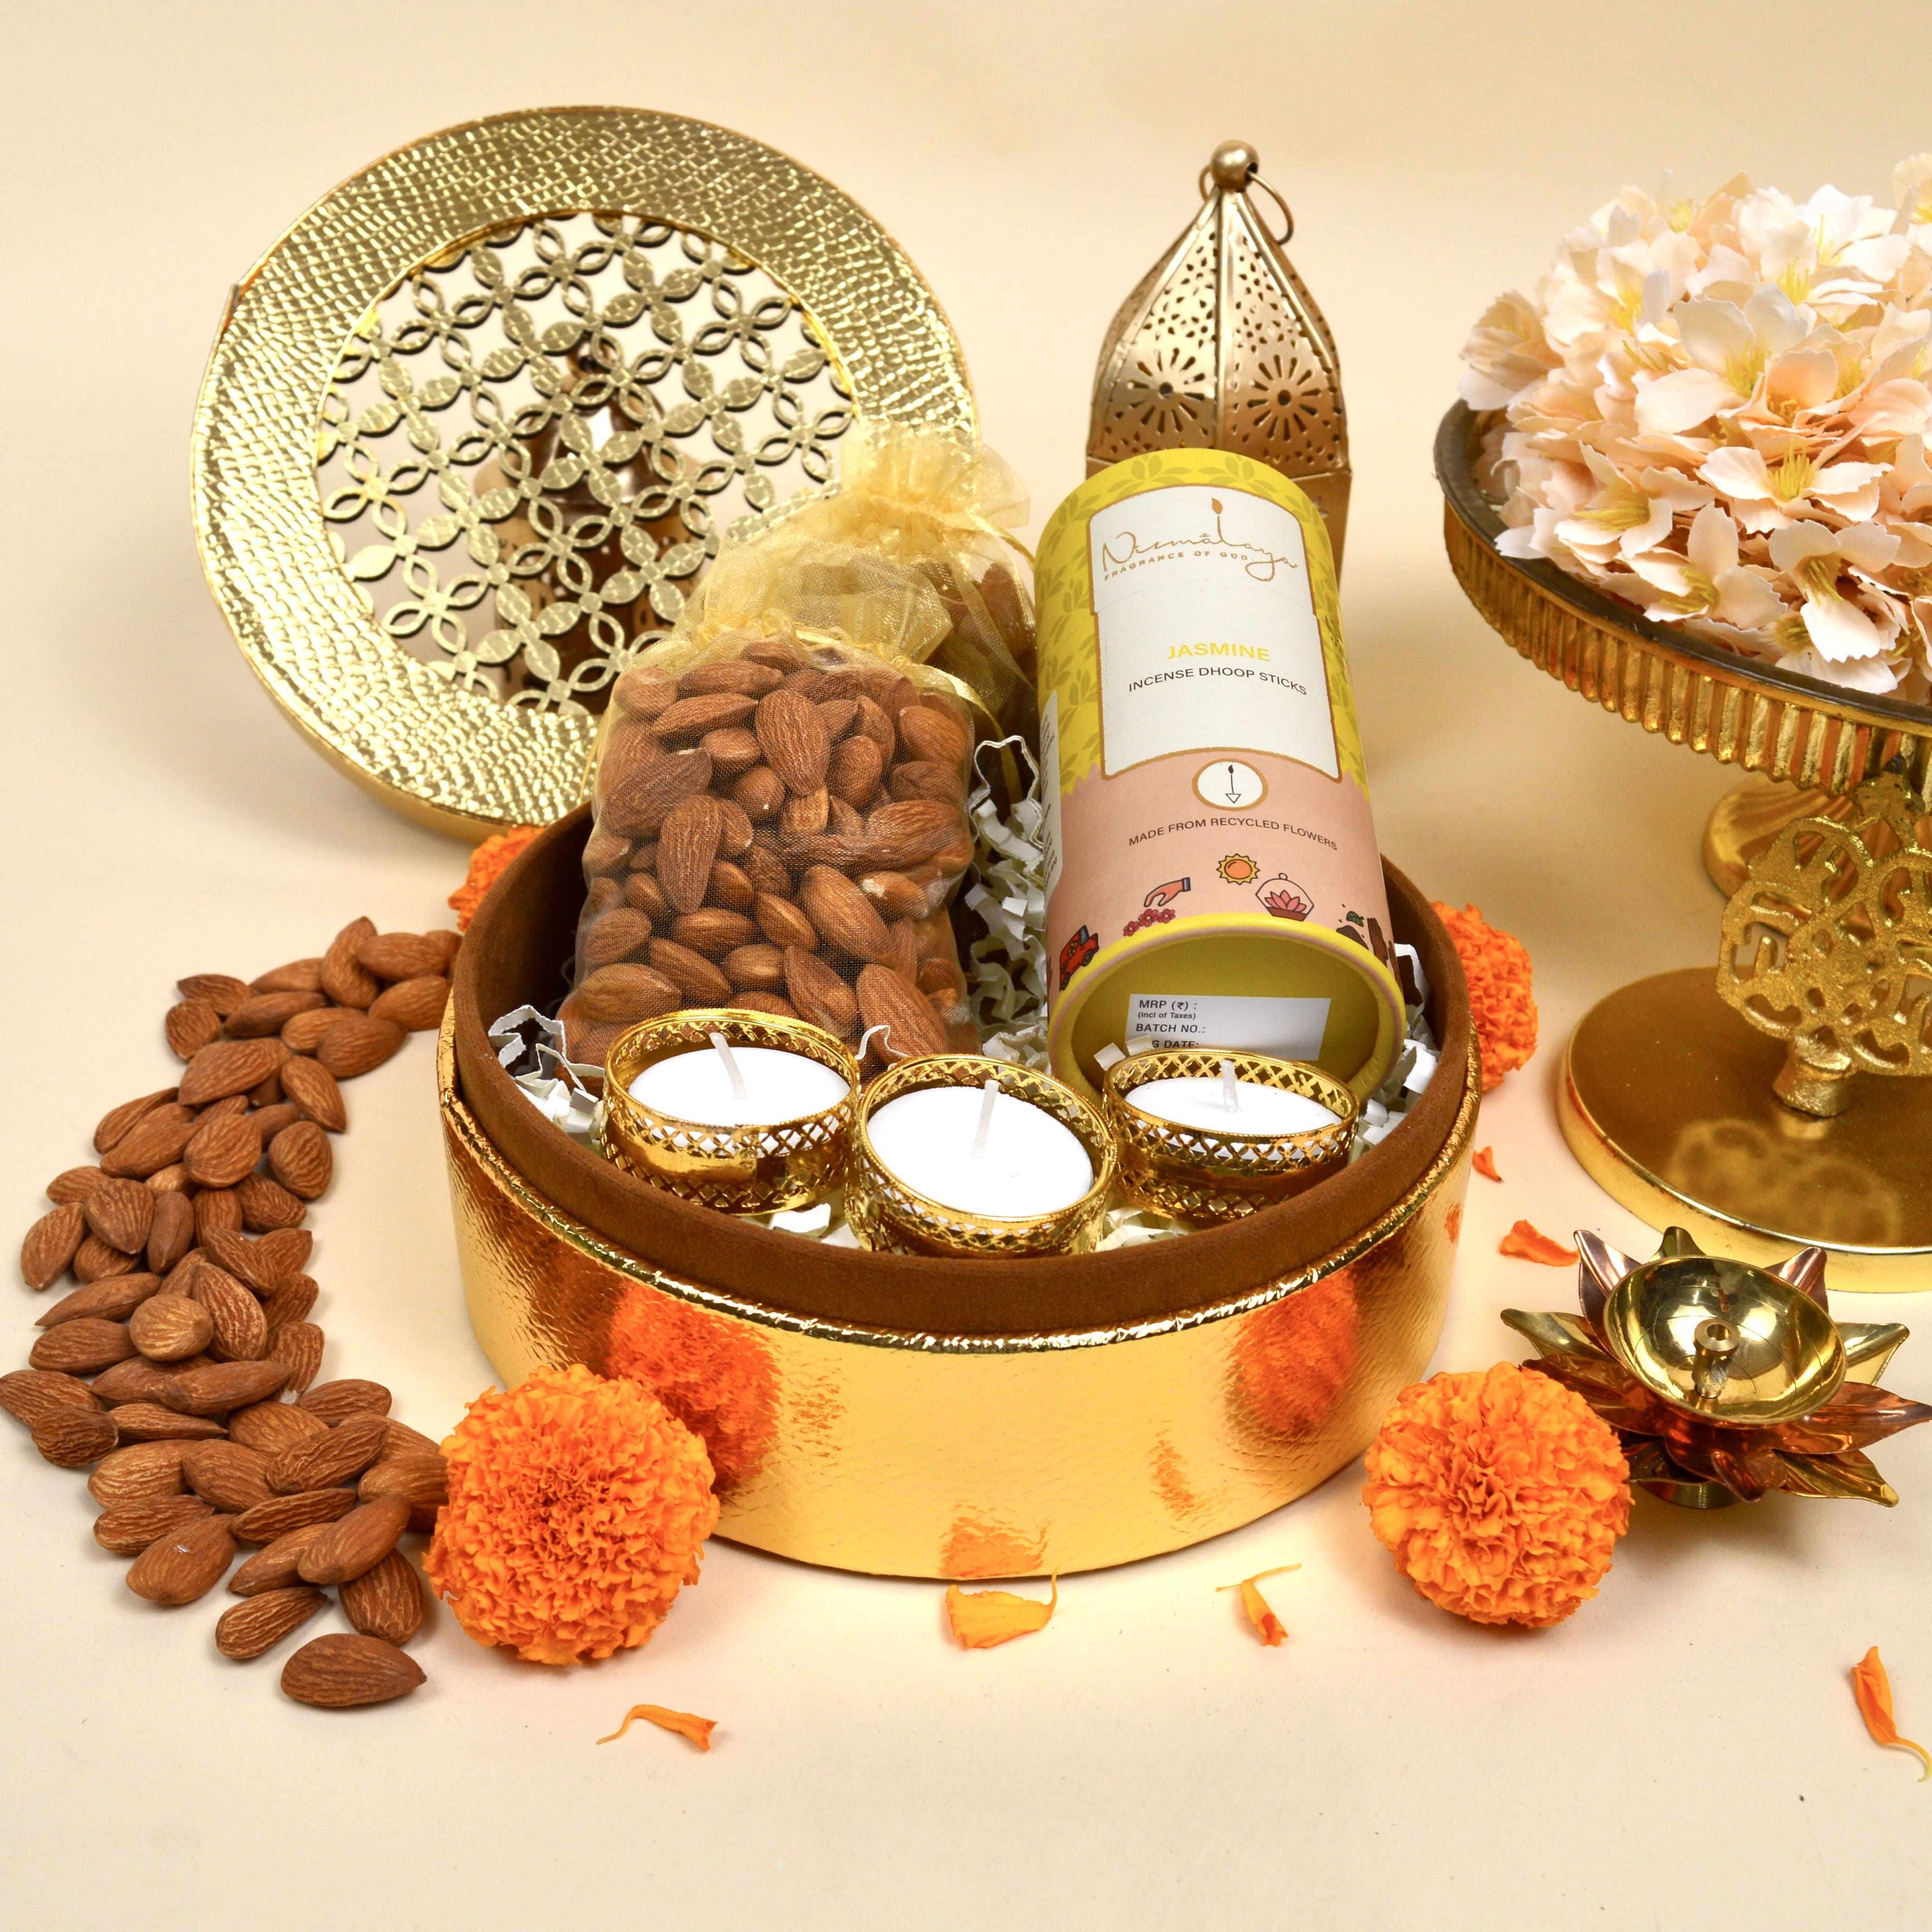 Diwali Gift Hamper Idea for Corporate – Between Boxes Gifts